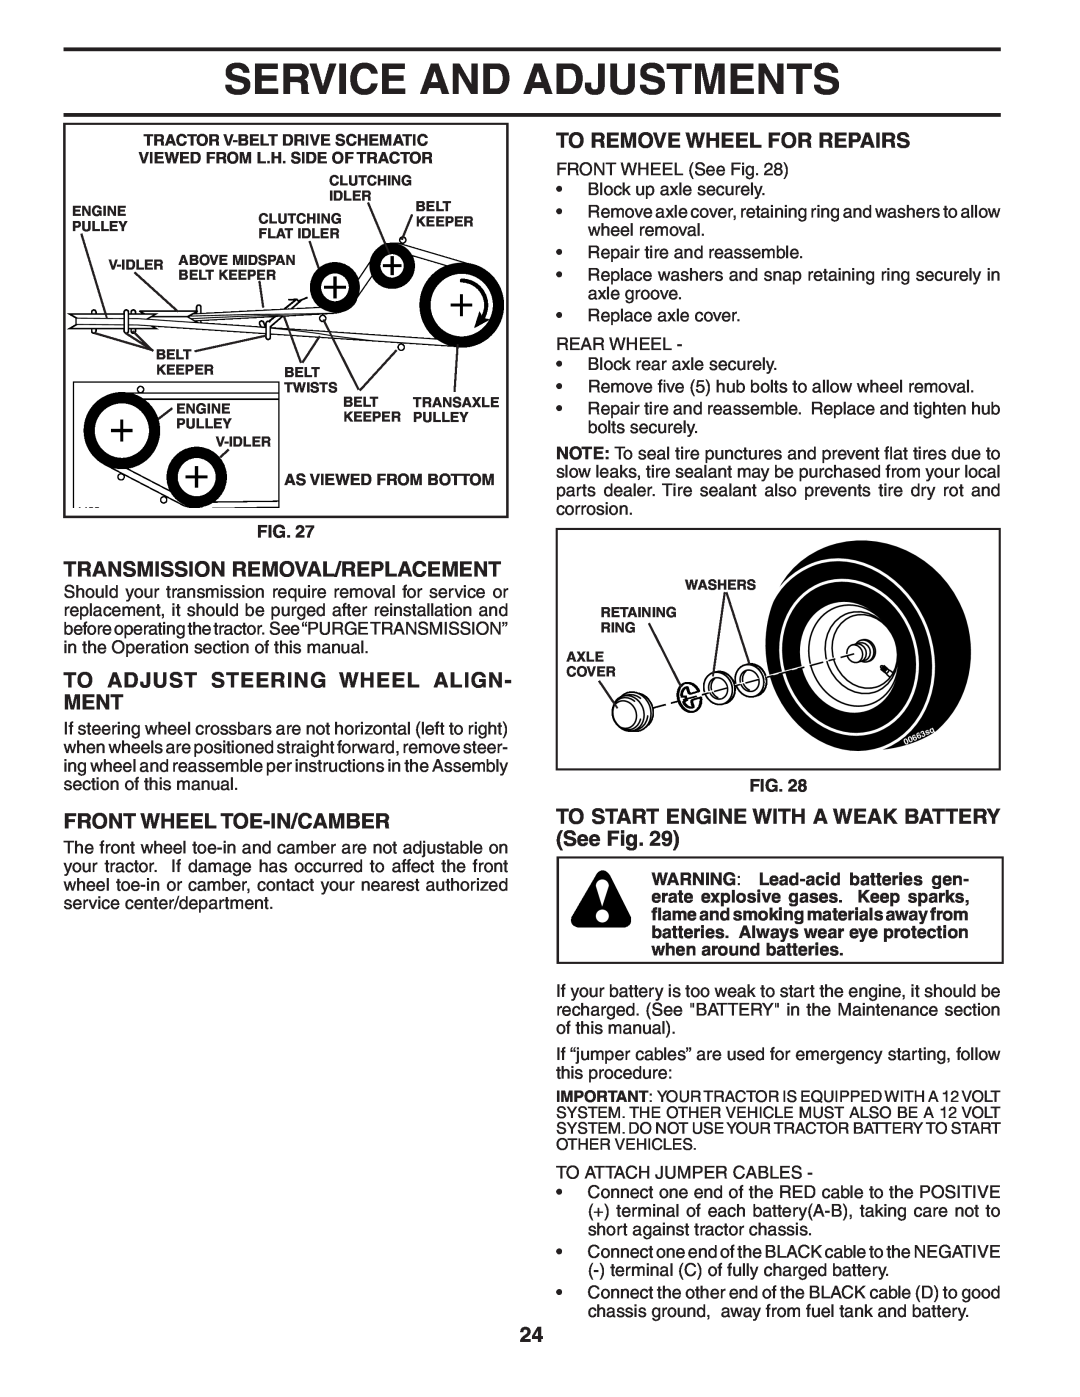 Poulan 194604 manual Transmission Removal/Replacement, To Adjust Steering Wheel Align- Ment, Front Wheel Toe-In/Camber 